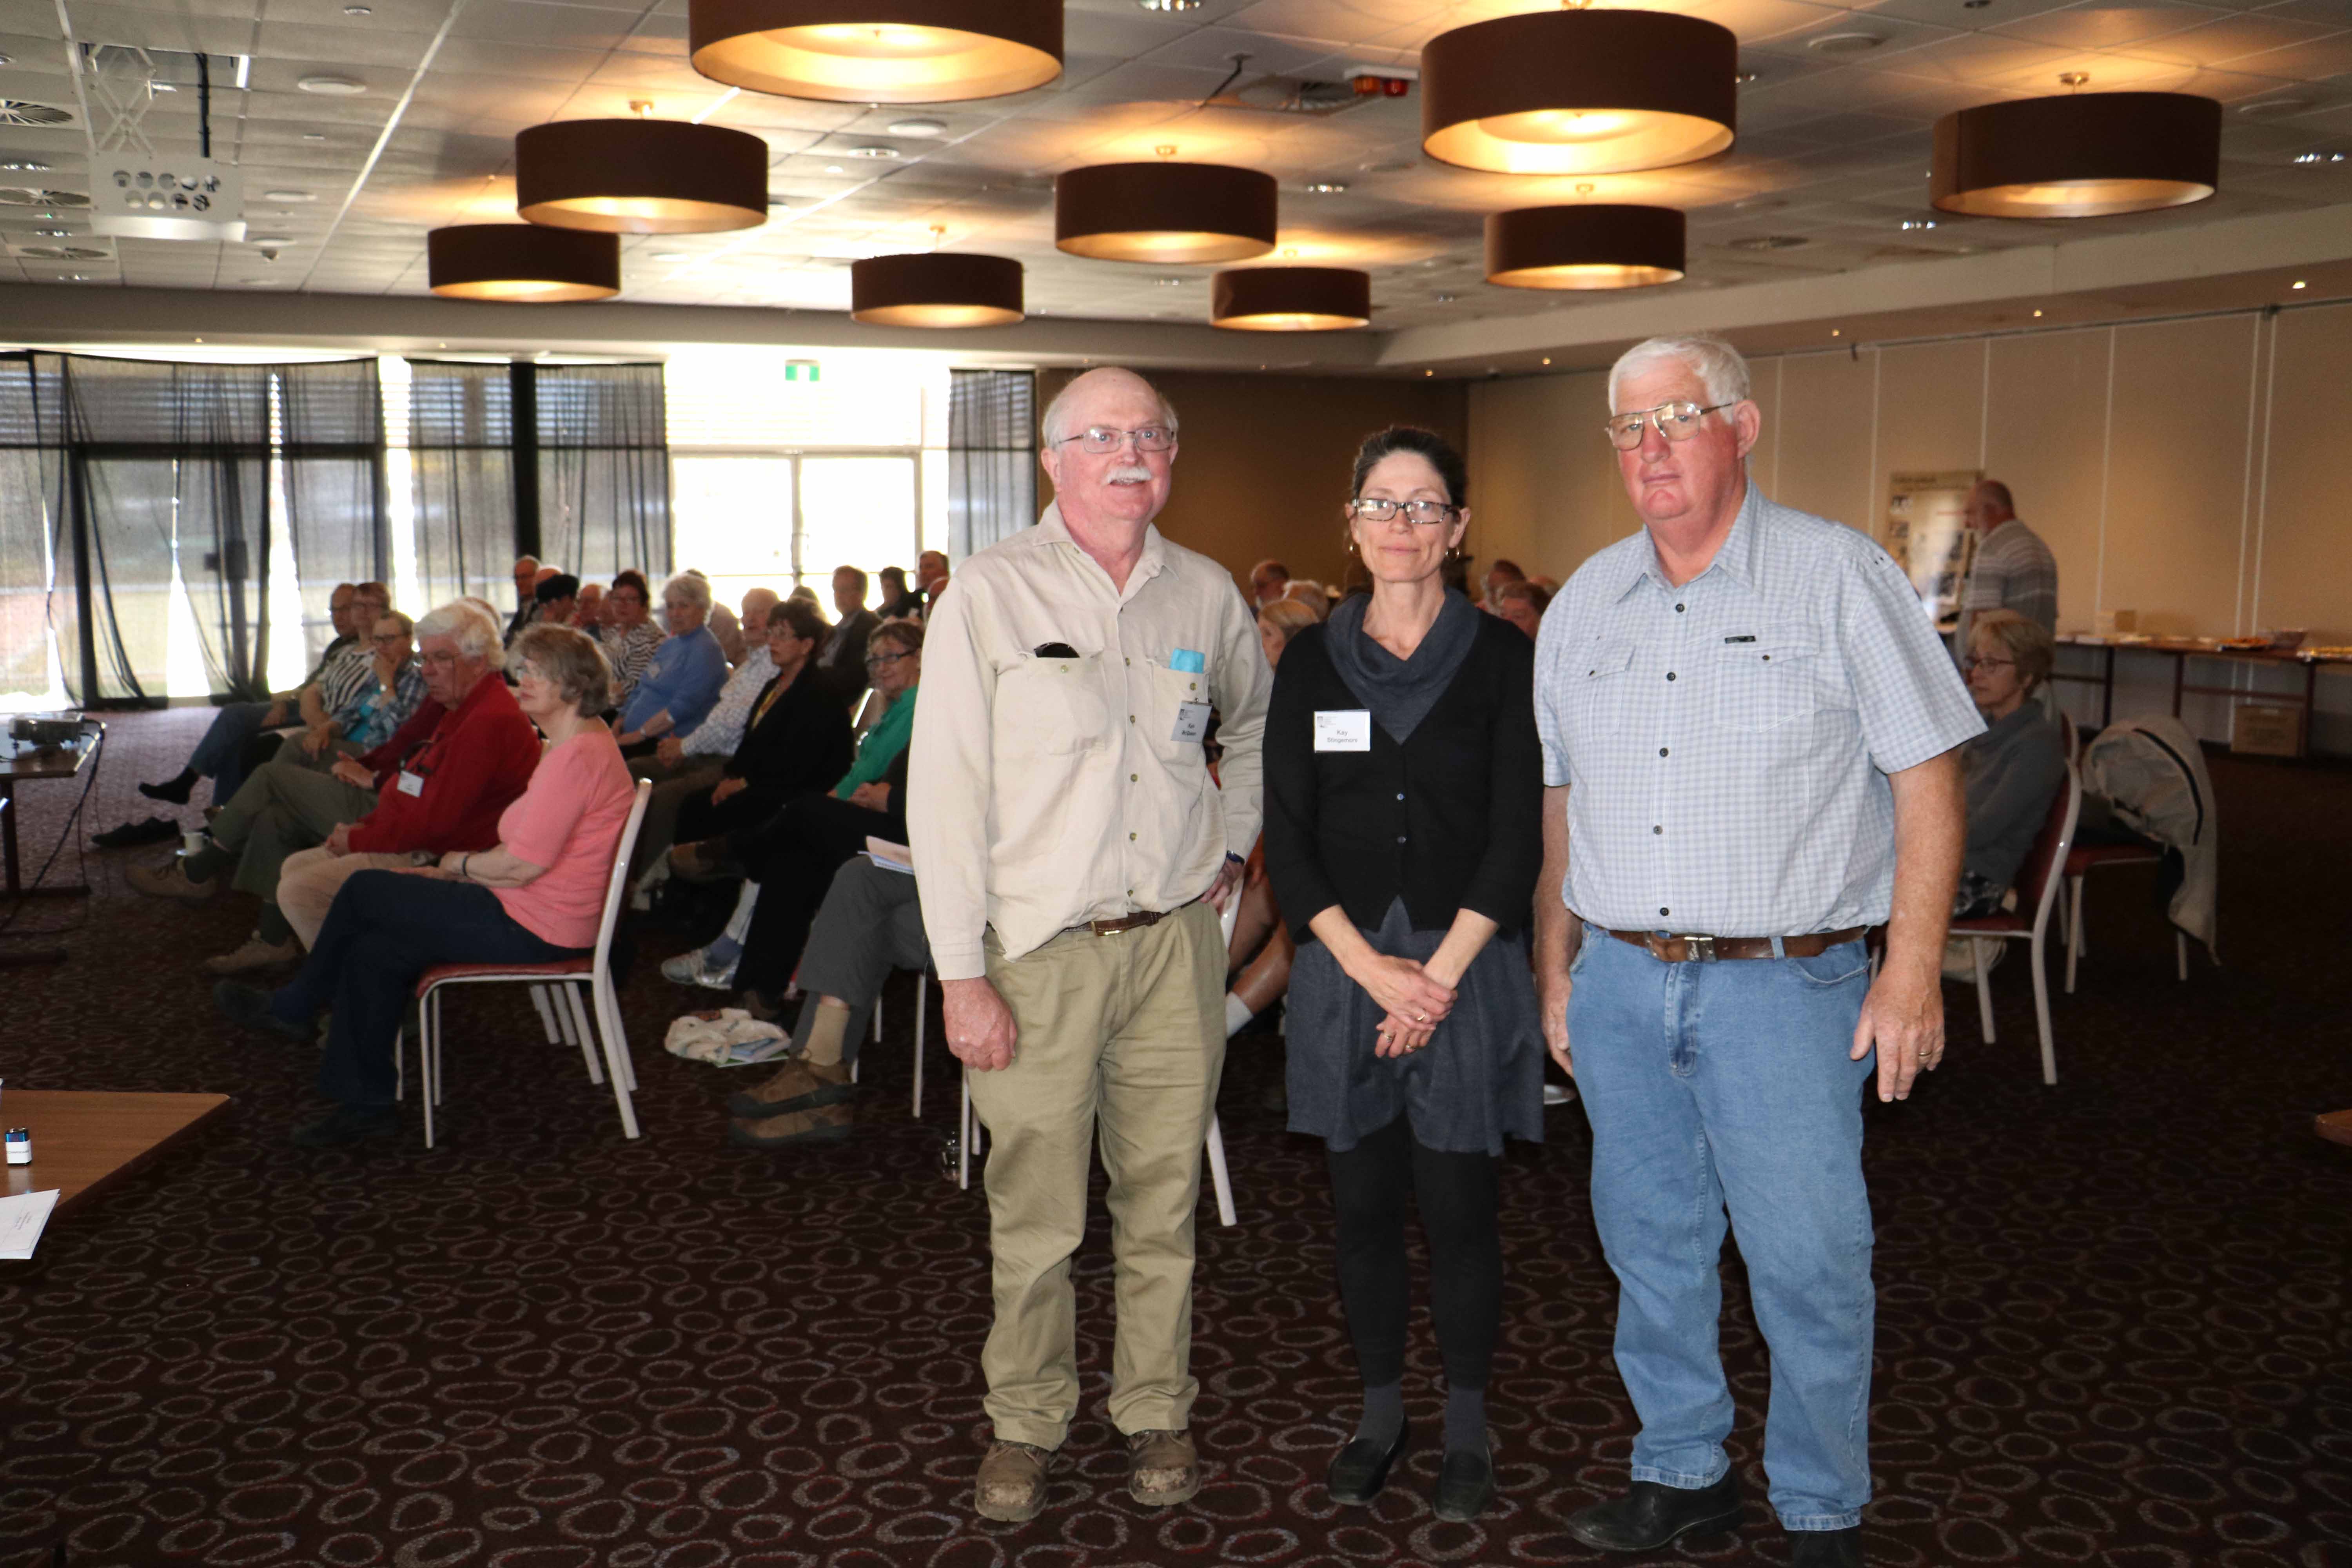 Cobar is hosting the 22nd annual conference of the Australasian Mining History  Association this week with the group learning about Cobar’s extensive mining history. Pictured above is the conference organiser Dr Ken McQueen with The Great Cobar  Heritage Centre’s museum curator Kaye Stingemore and Cobar Miners’ Memorial  organiser Barry Knight.  